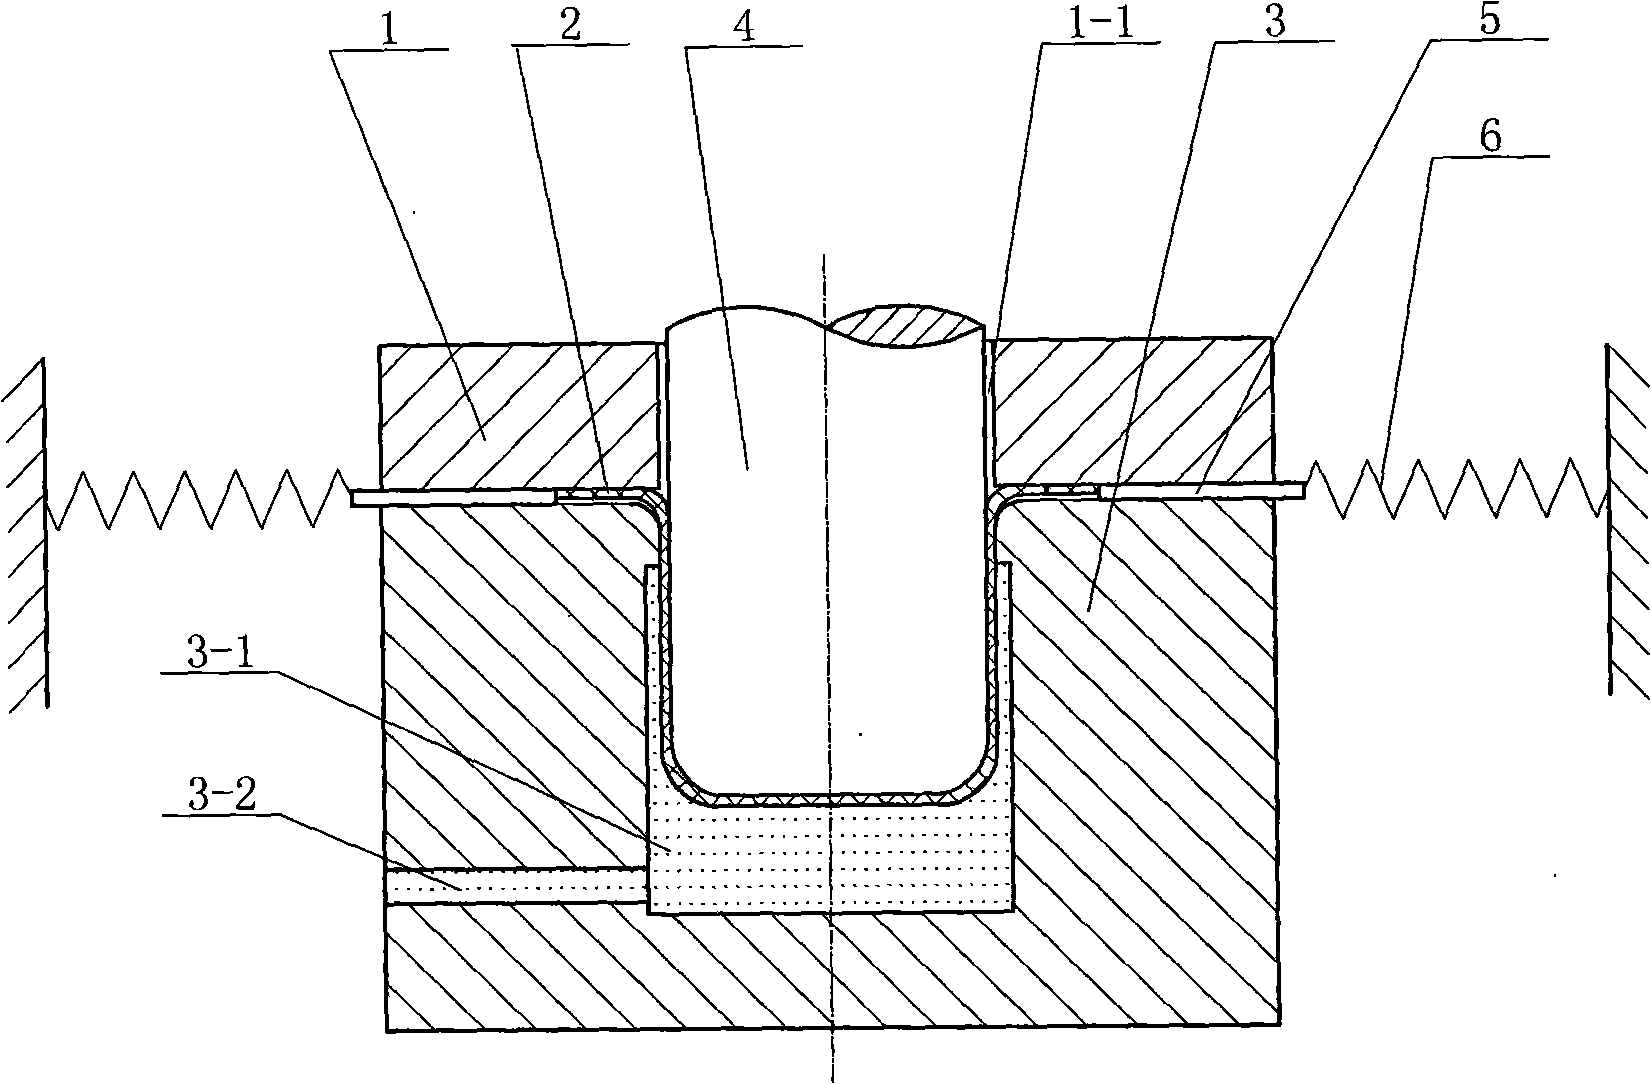 Device for improving forming limit in hydromechanical deep drawing of sheet material and method thereof